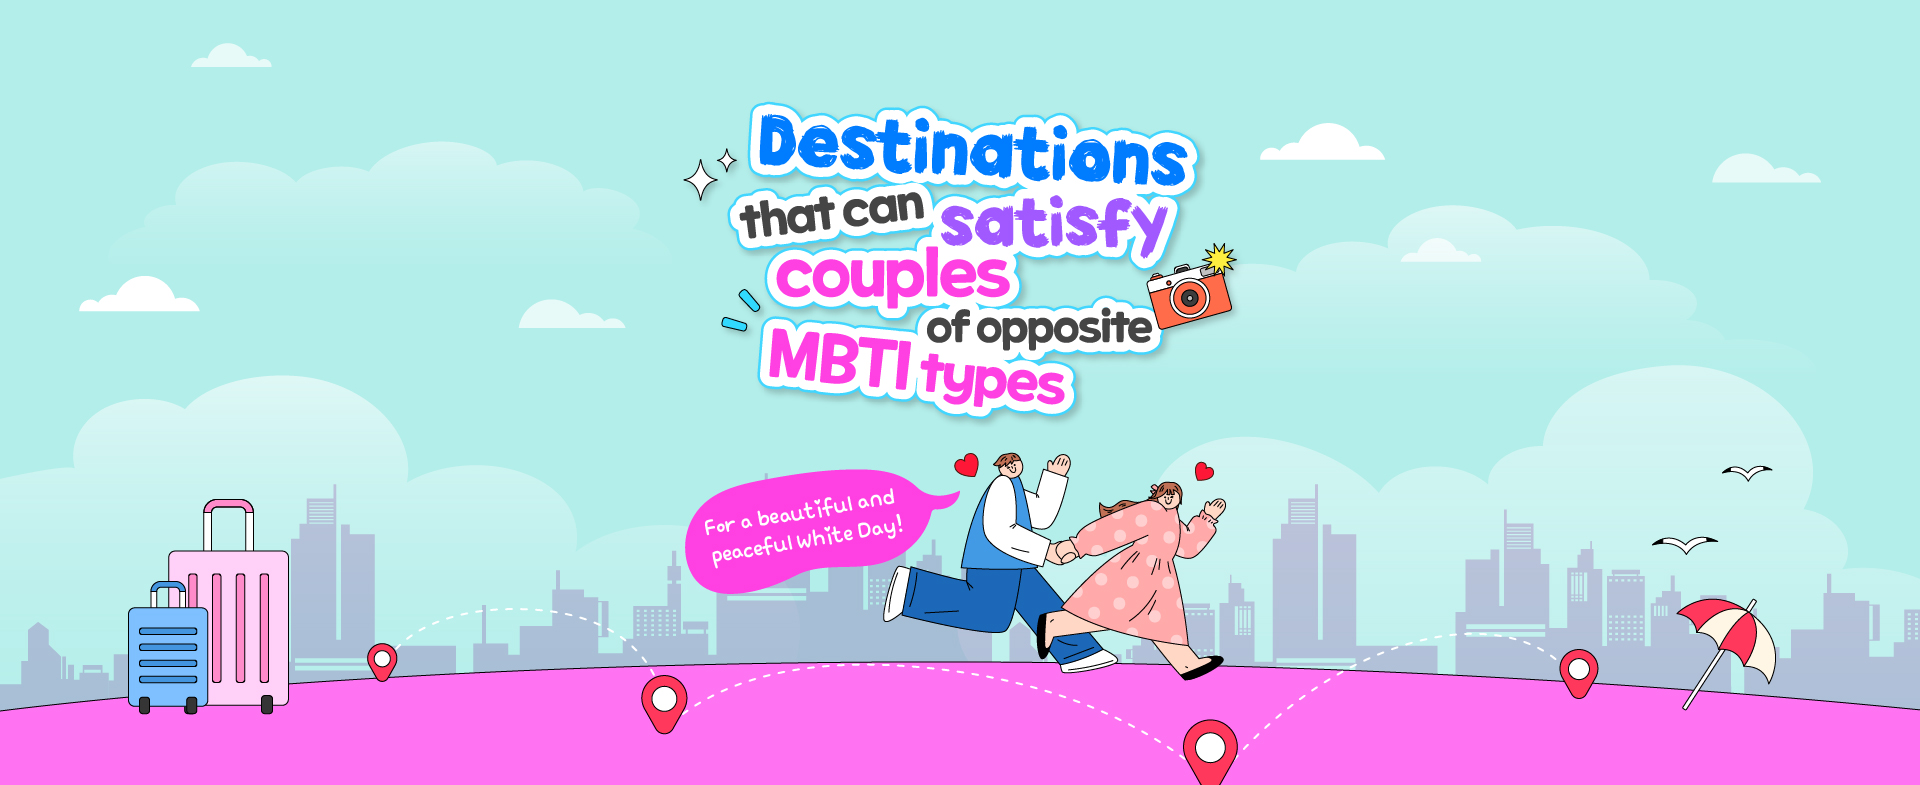 Destinations that can satisfy couples of opposite MBTI types